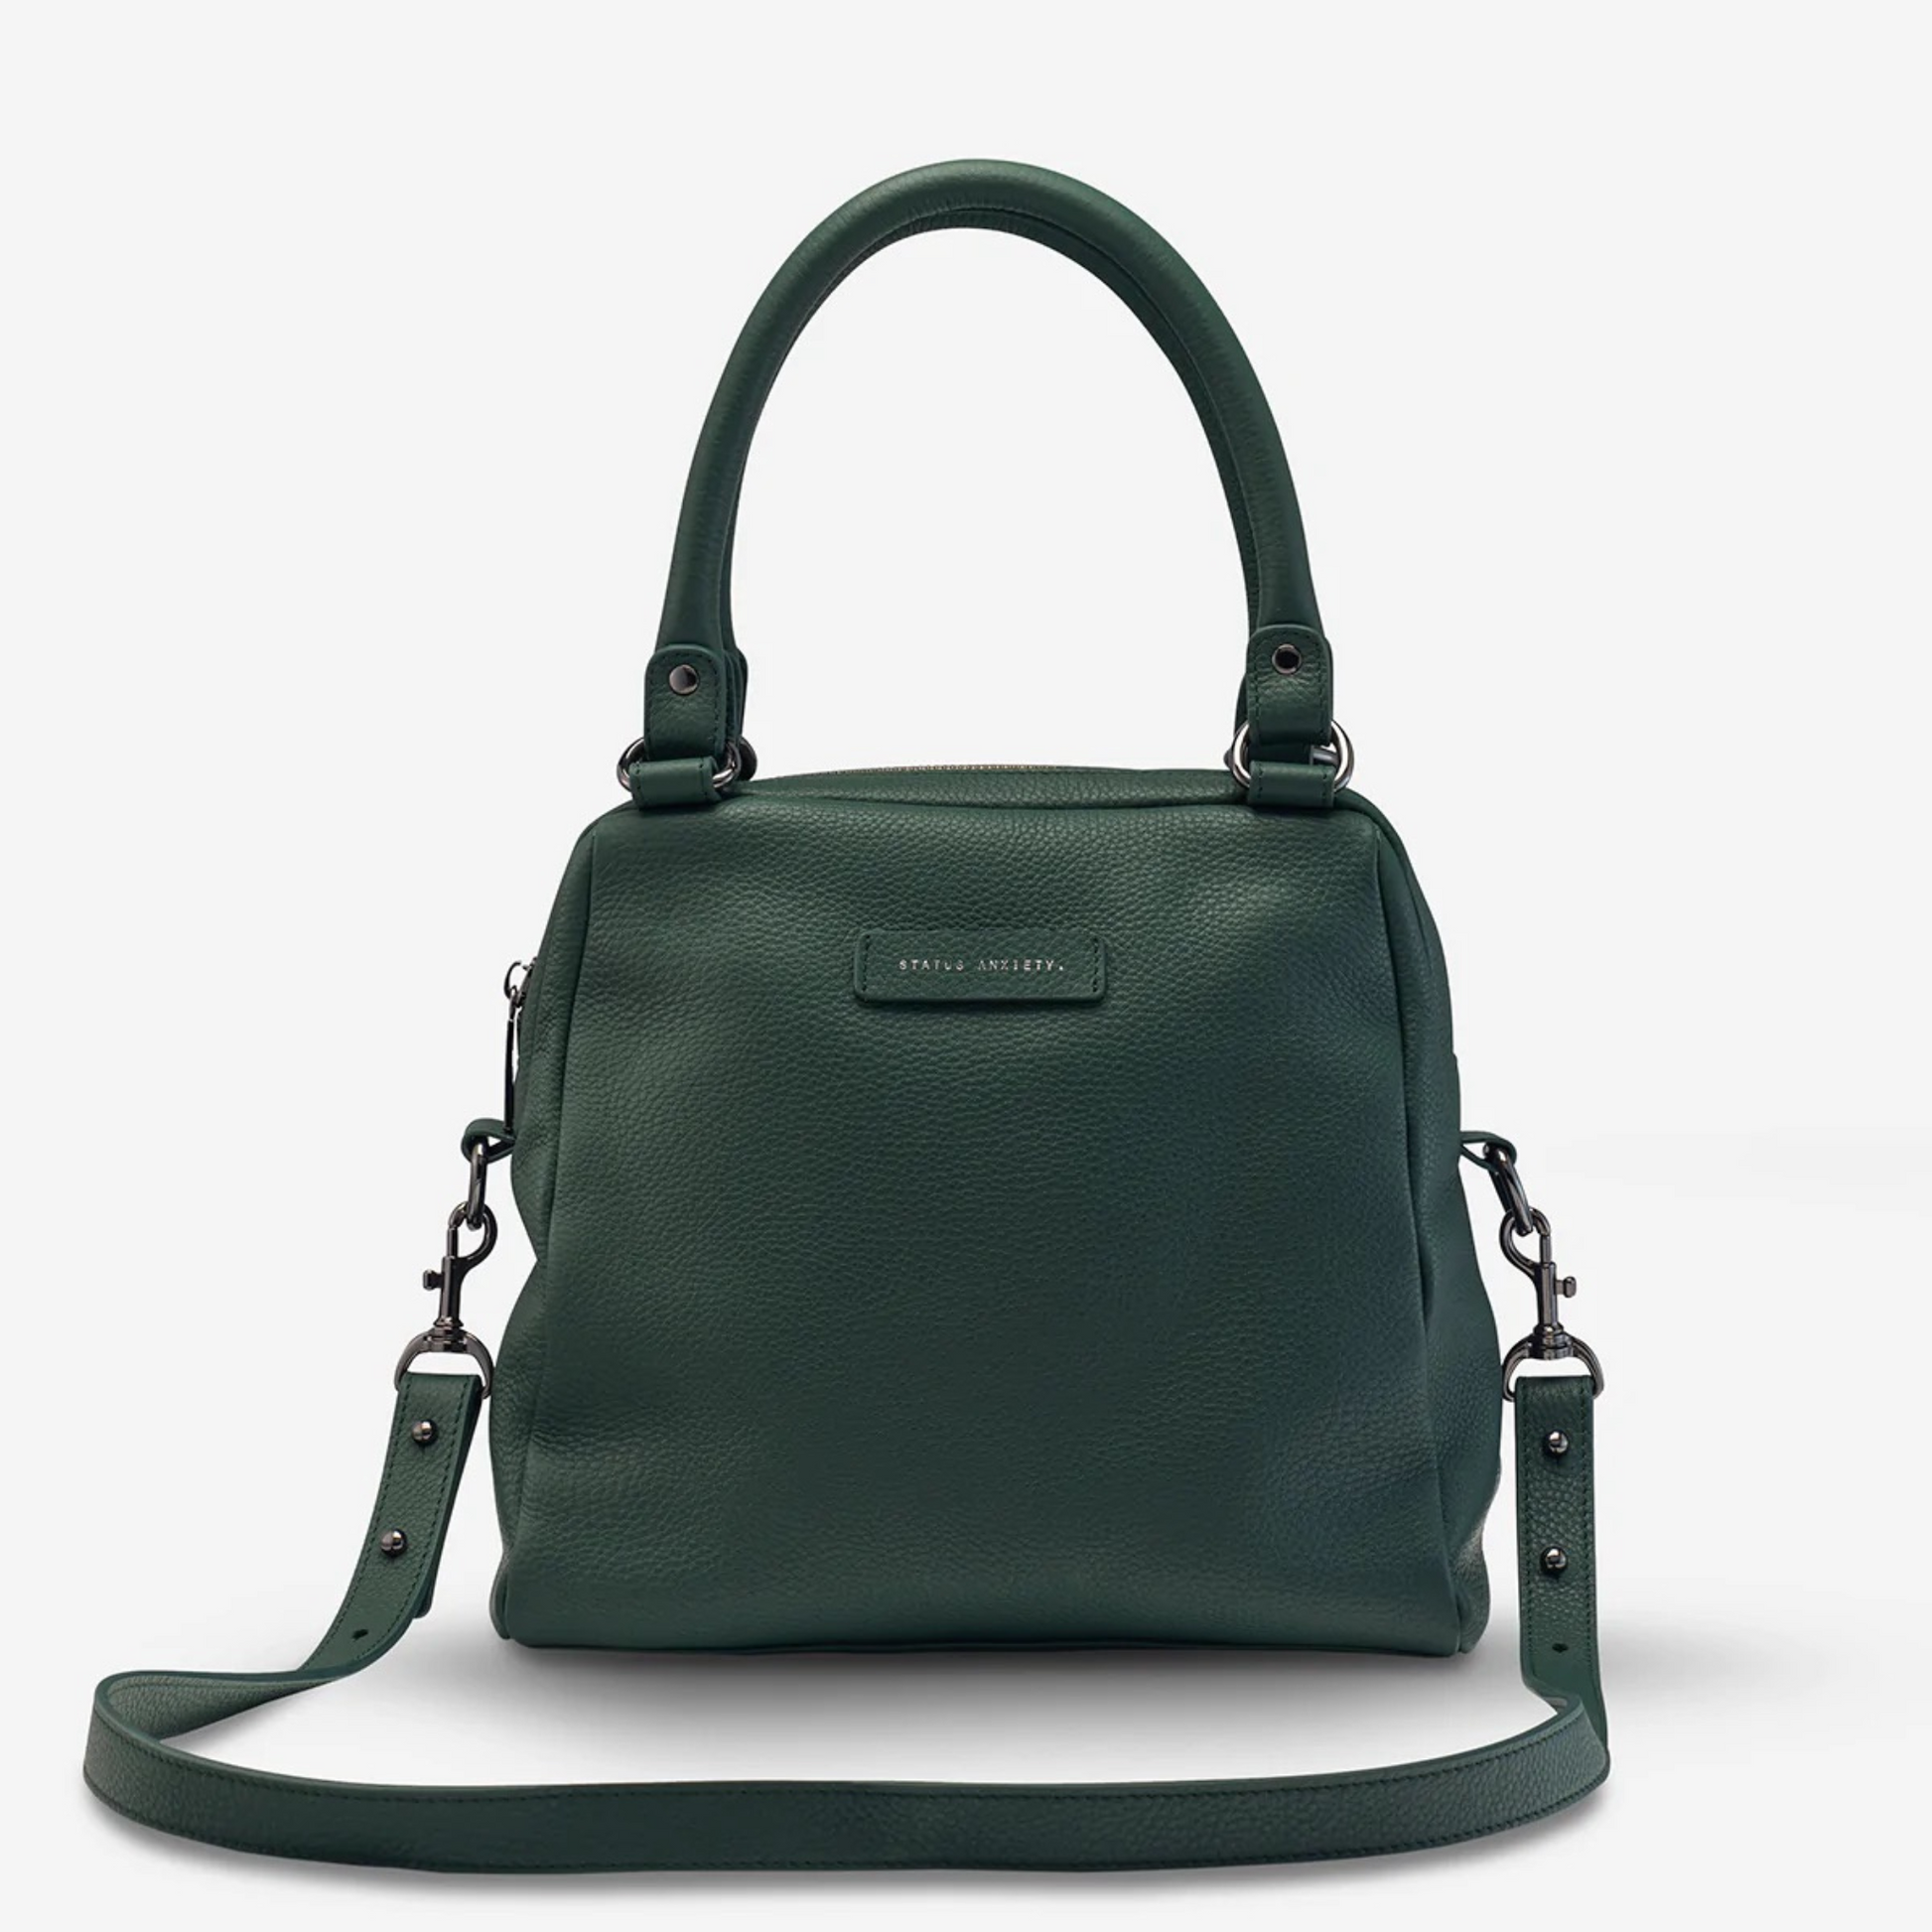 Status Anxiety, the Last Mountains handbag with its taller silhouette is the perfect day to night companion and can be worn over elbow, shoulder or body (with long strap).